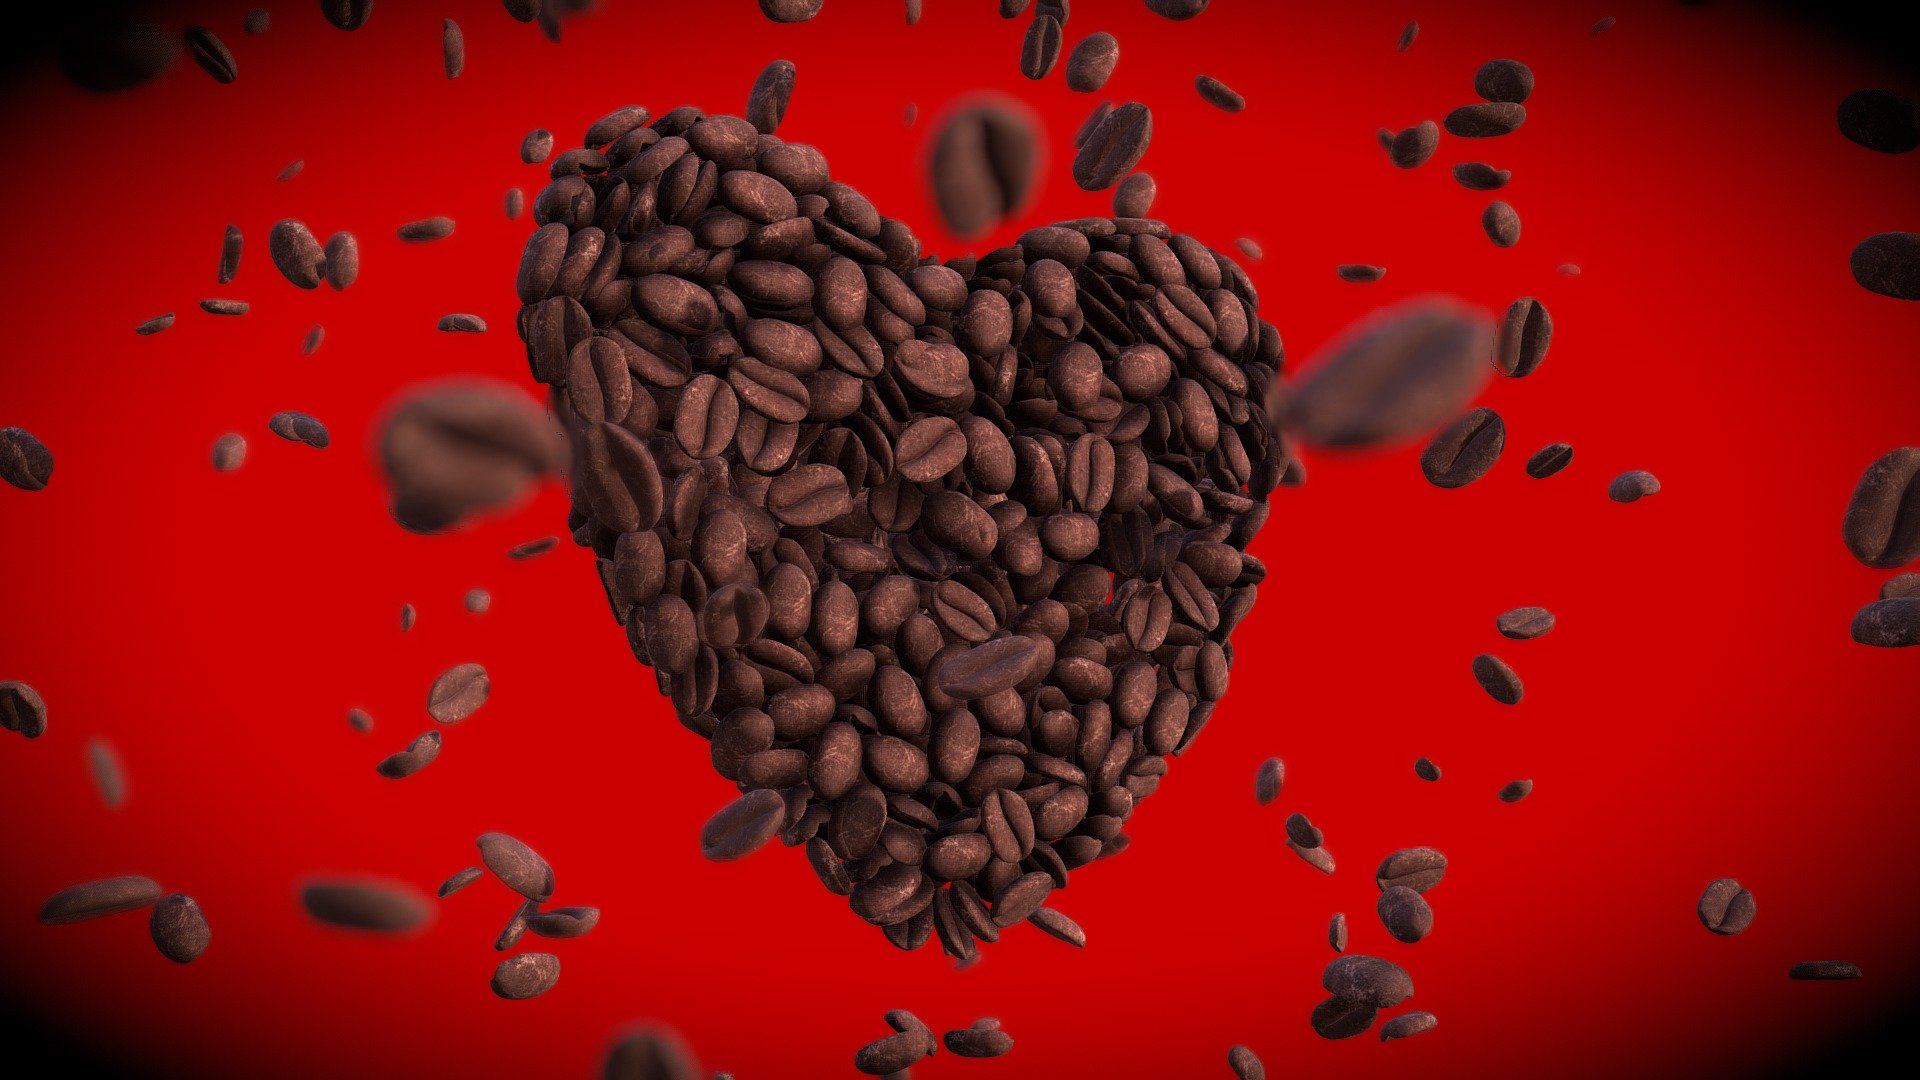 There's nothing better than coffee and 3D  ☕️❤️

Created for the &ldquo;Sketchfab Weekly Art Challenge 2022&ldquo;

Week 03 (February) - Theme: Heart

Follow me                                                                            

ArtStation:https://www.artstation.com/rafaelbr873d                 

Instagram:https://www.instagram.com/rafaelbr873d/              

Twitter:https://twitter.com/RafaelBR873D                                

Youtube:https://www.youtube.com/RafaelBR873D - Coffee Bean Heart (#SketchfabWeeklyChallenge) - 3D model by Rafael Rodrigues (@RafaelBR873D) 3d model